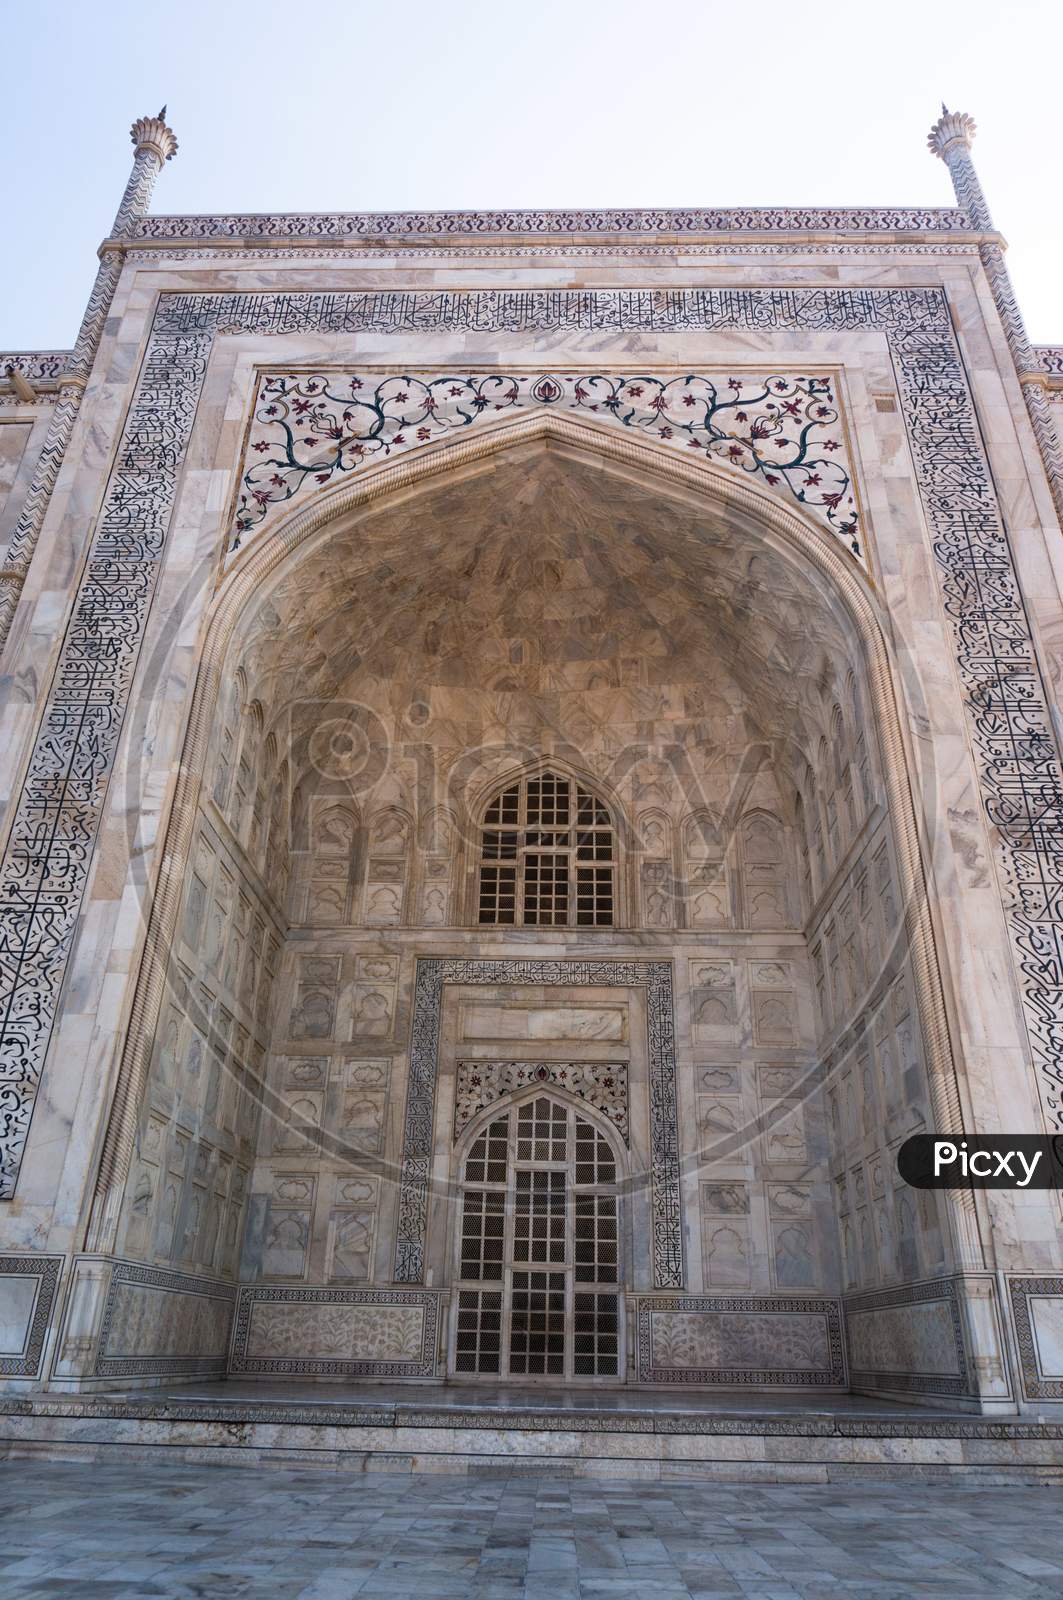 Arch The Taj Mahal And Texture Of The Building